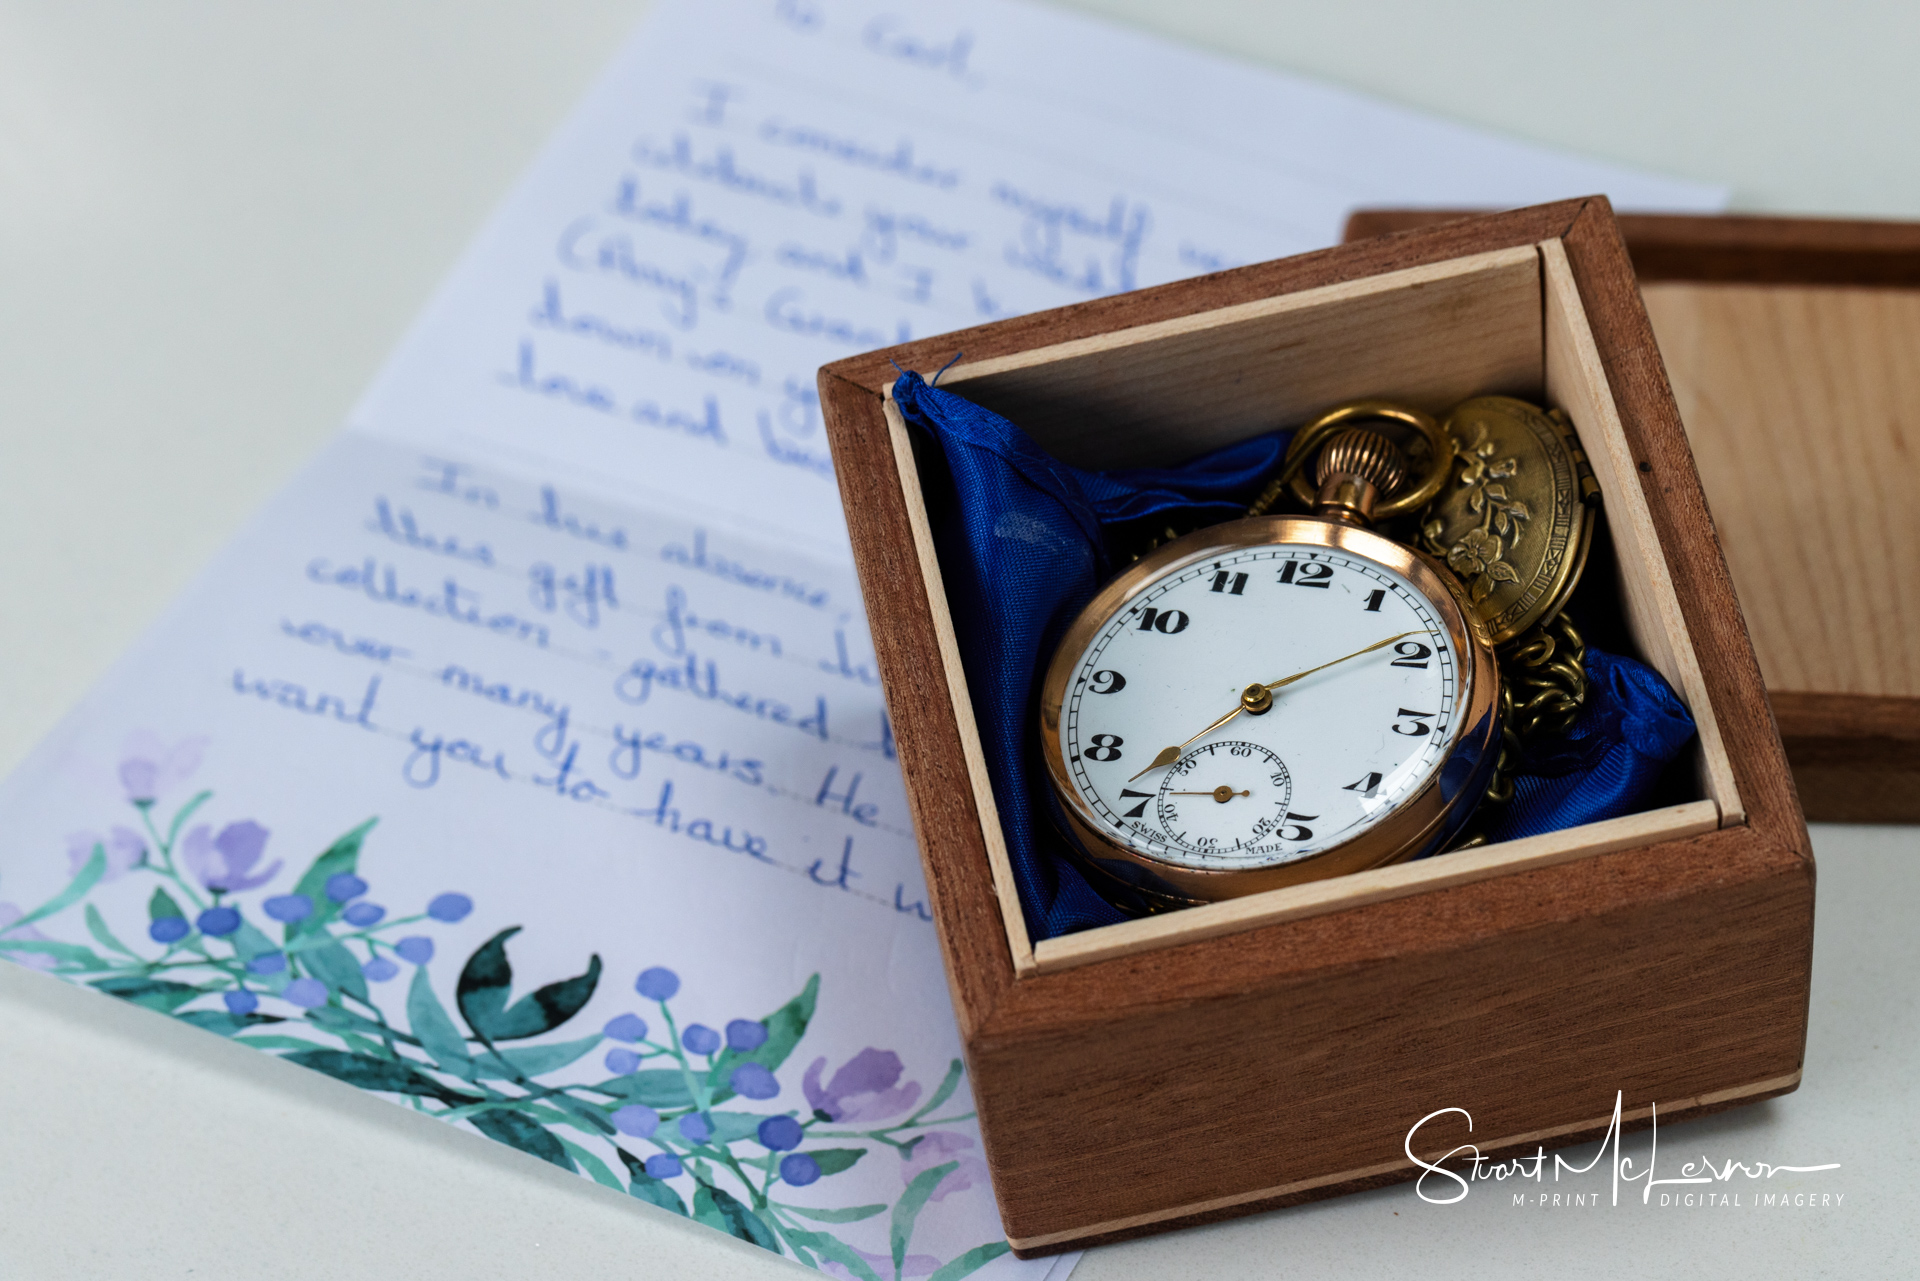 The groom's pocket watch in a presentation box on top of a letter from his bride-to-be